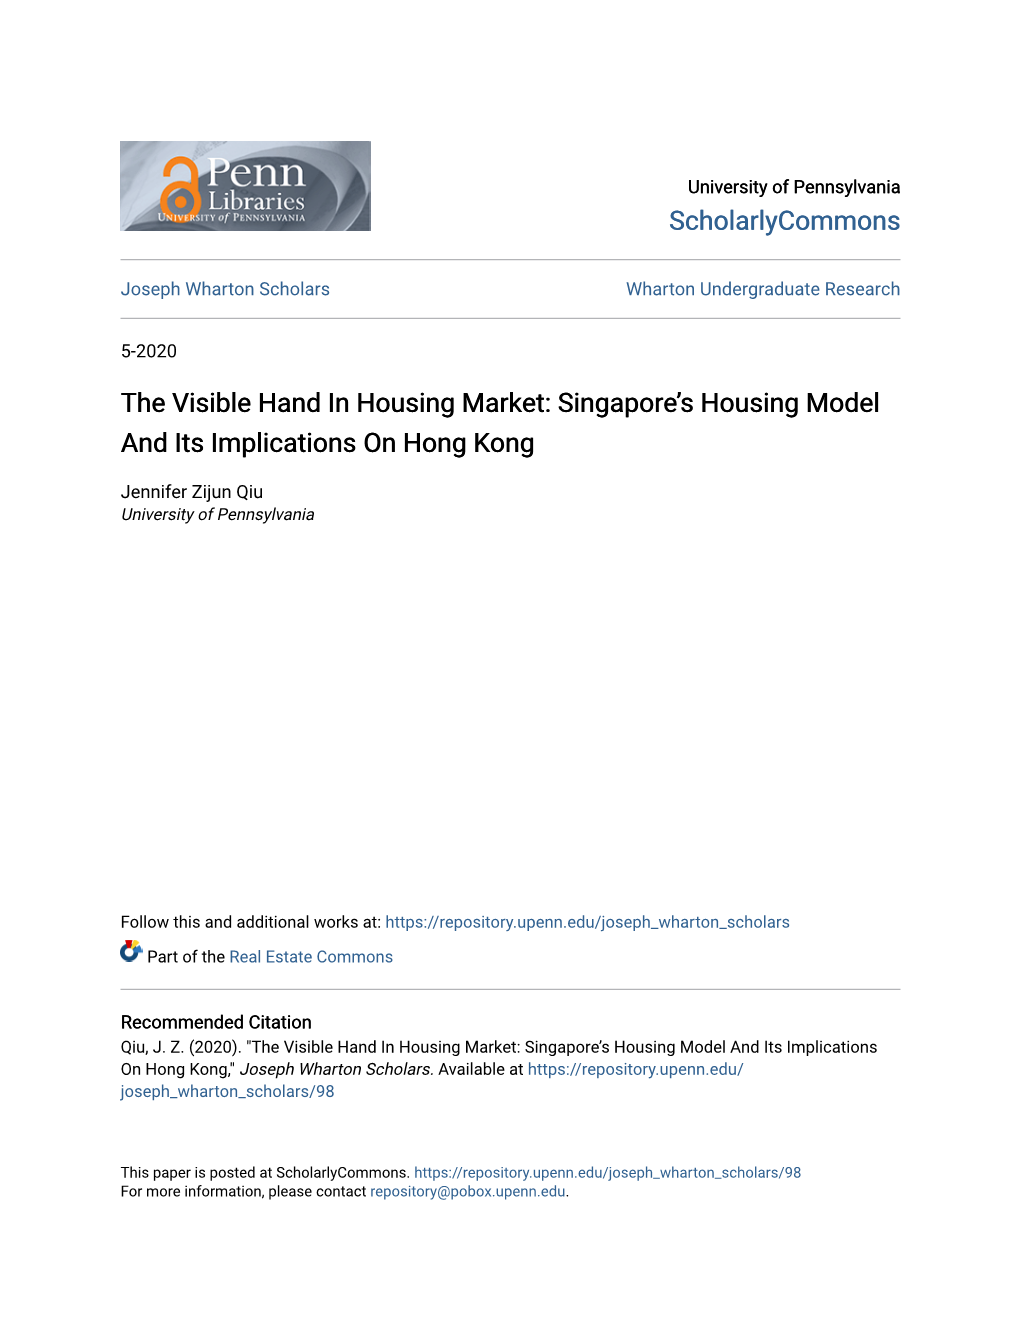 Singapore's Housing Model and Its Implications